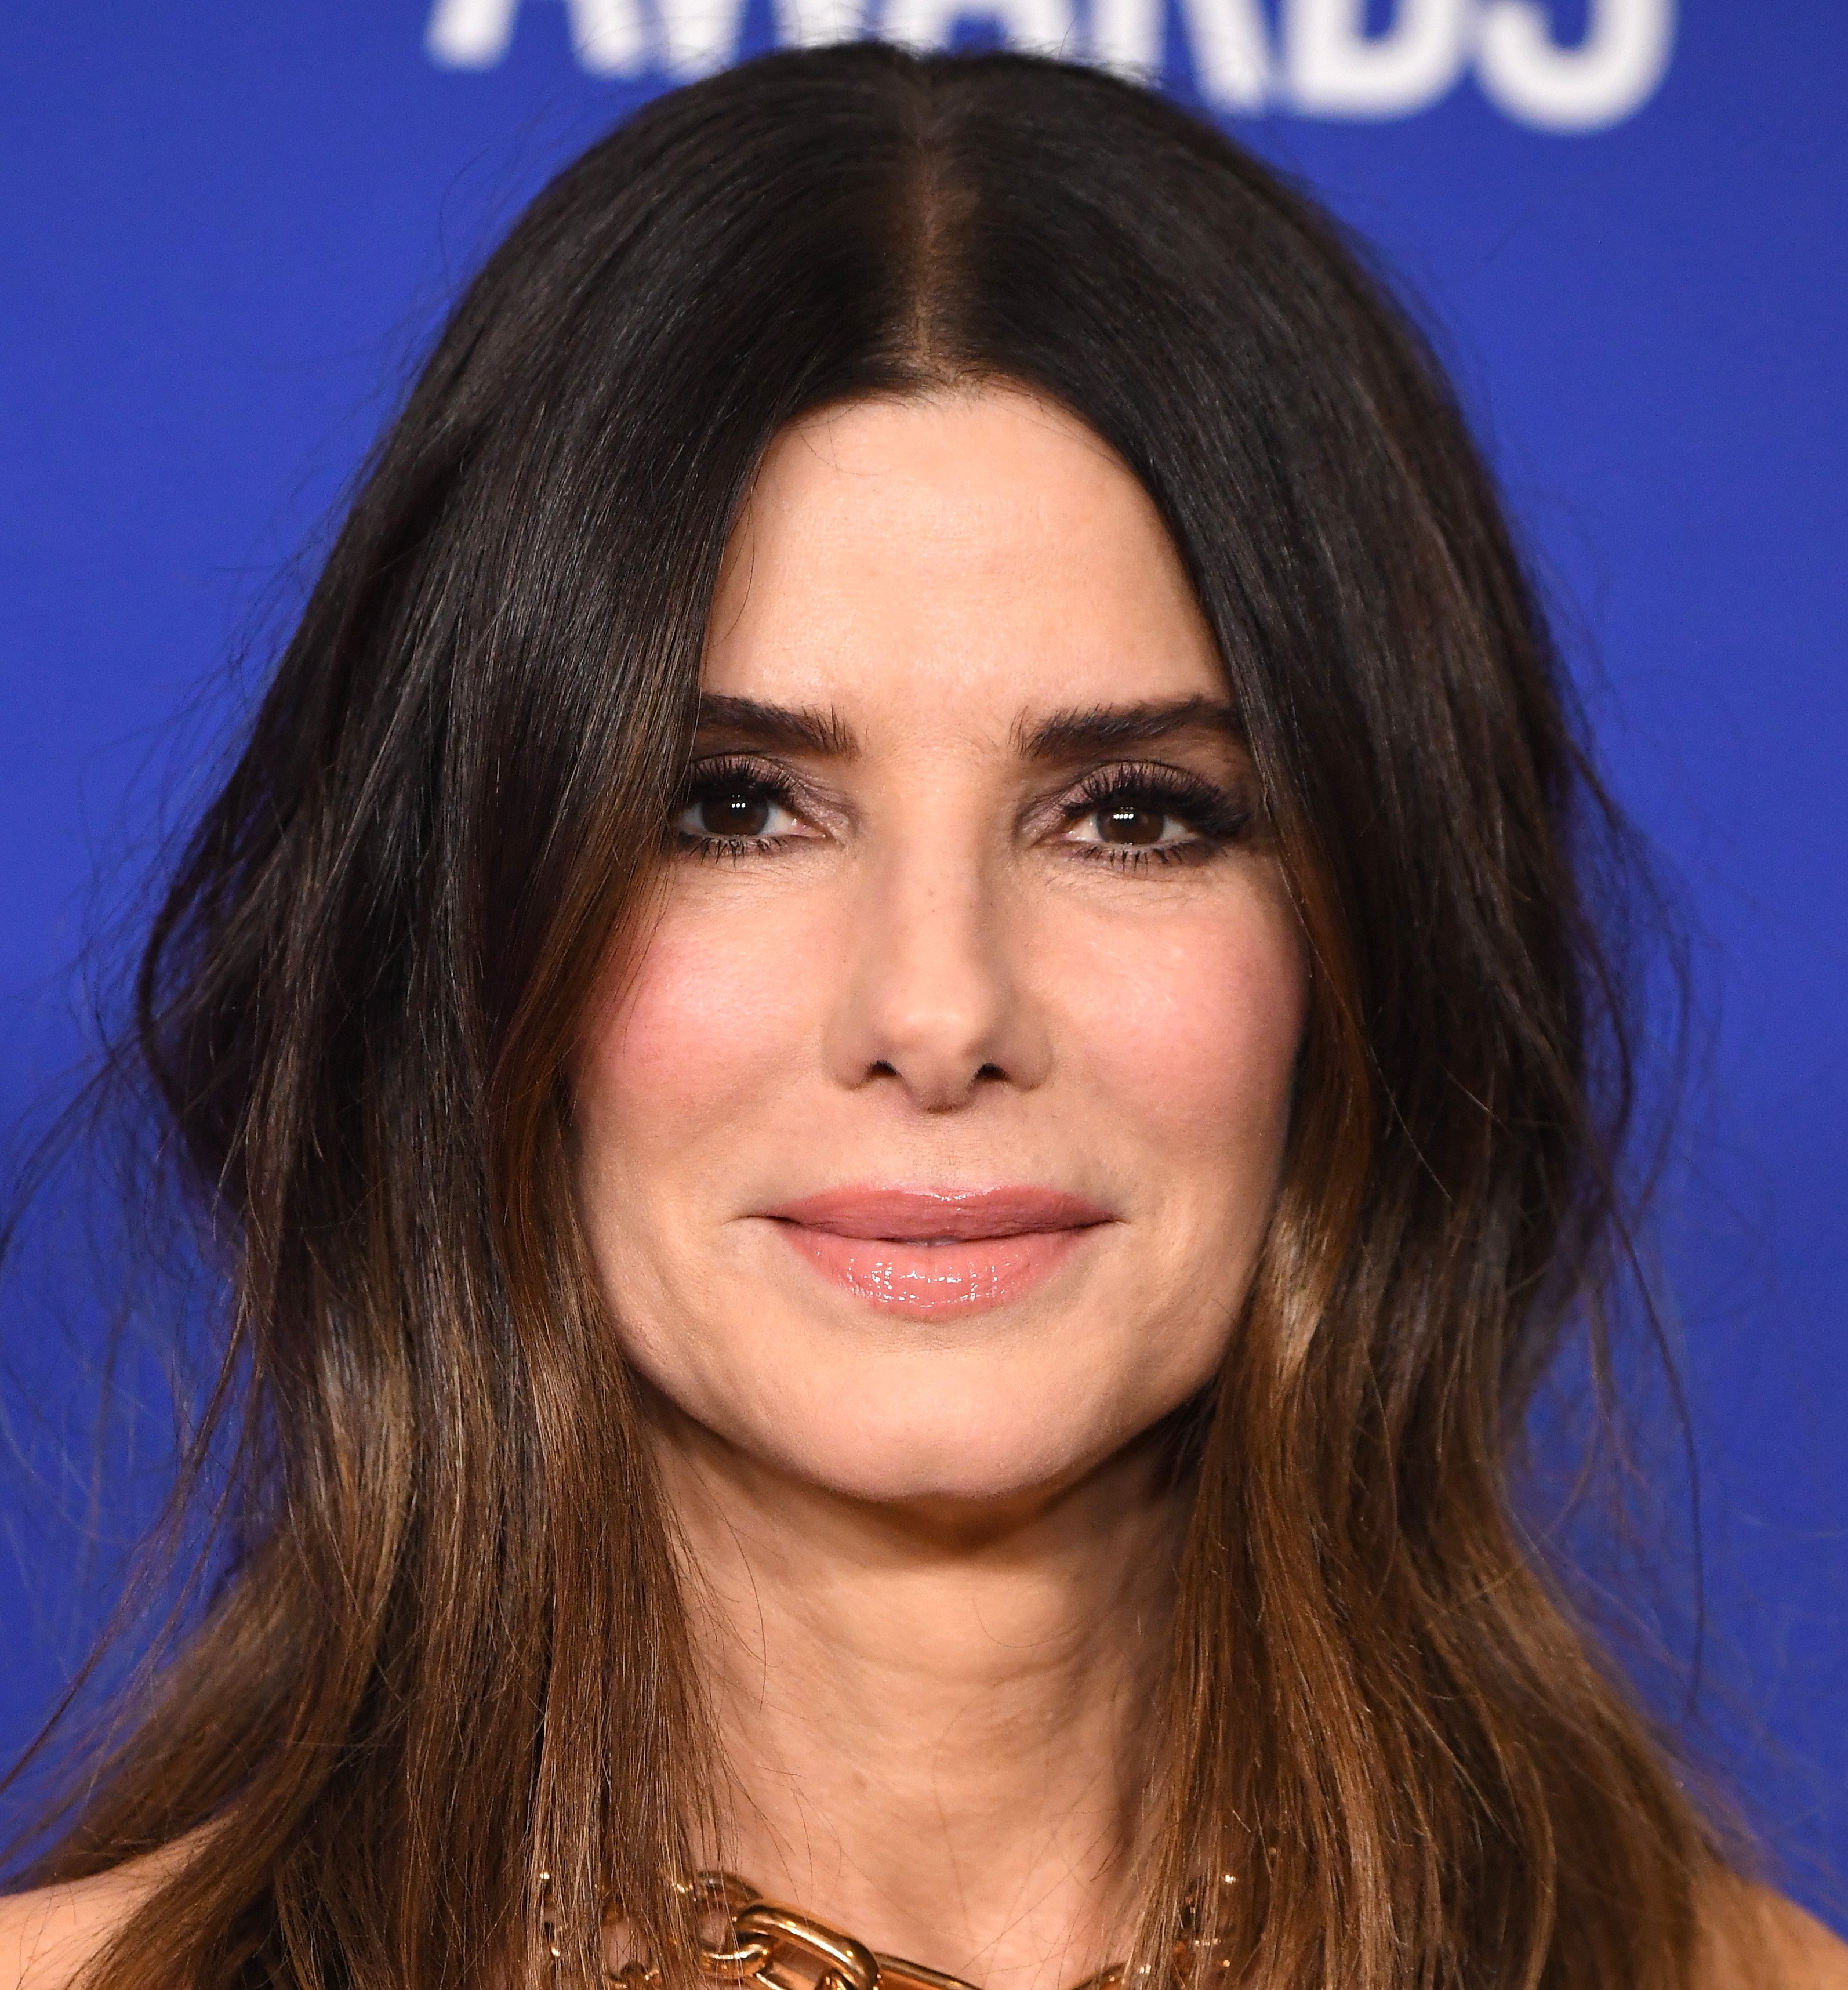 Actress Sandra Bullock posing in the press room at the 77th Annual Golden Globe Awards at The Beverly Hilton Hotel on January 05, 2020 in Beverly Hills, California. / Source: Getty Images